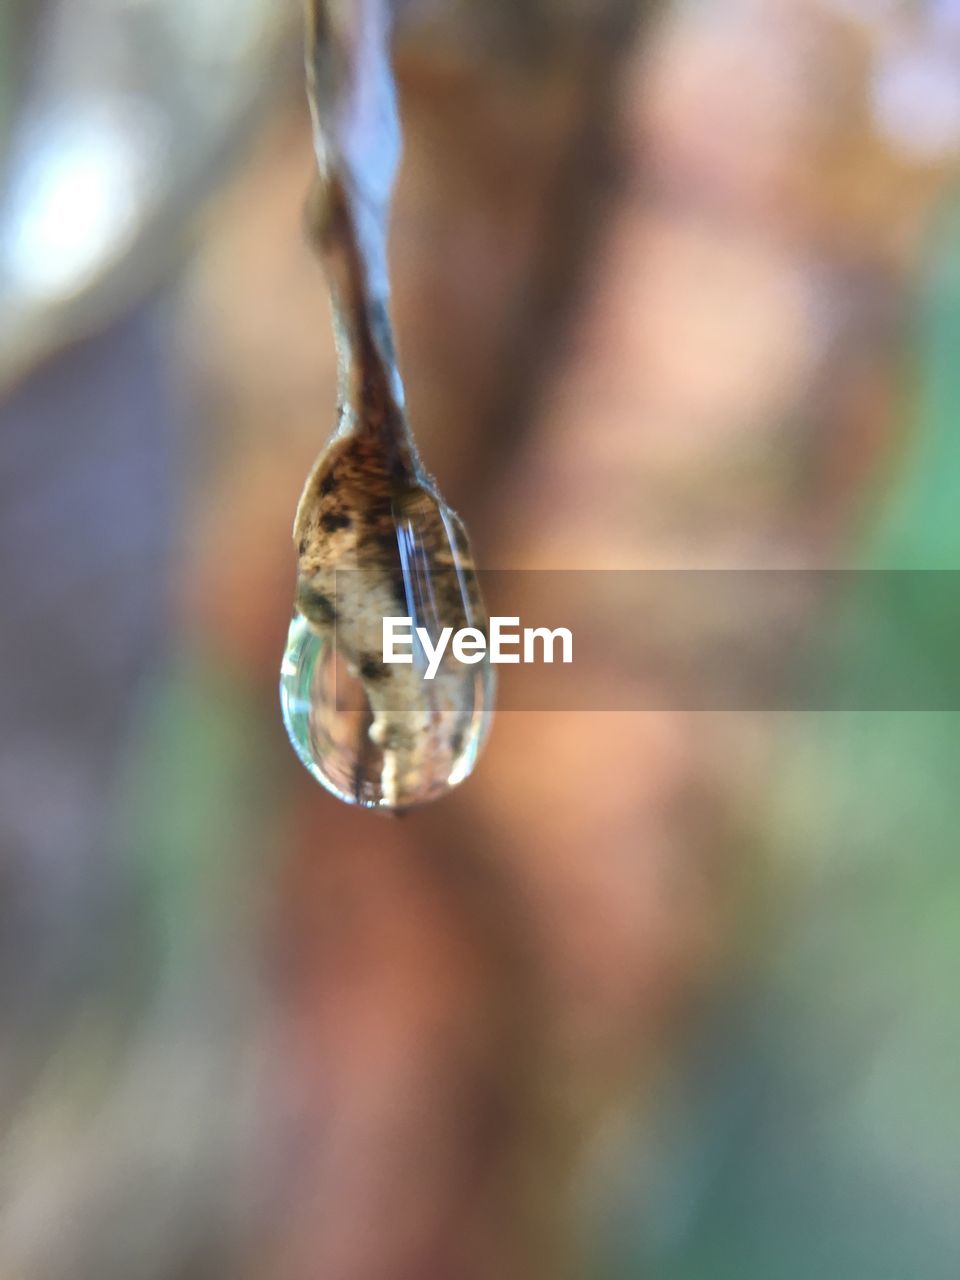 CLOSE-UP OF WATER DROP HANGING FROM OUTDOORS